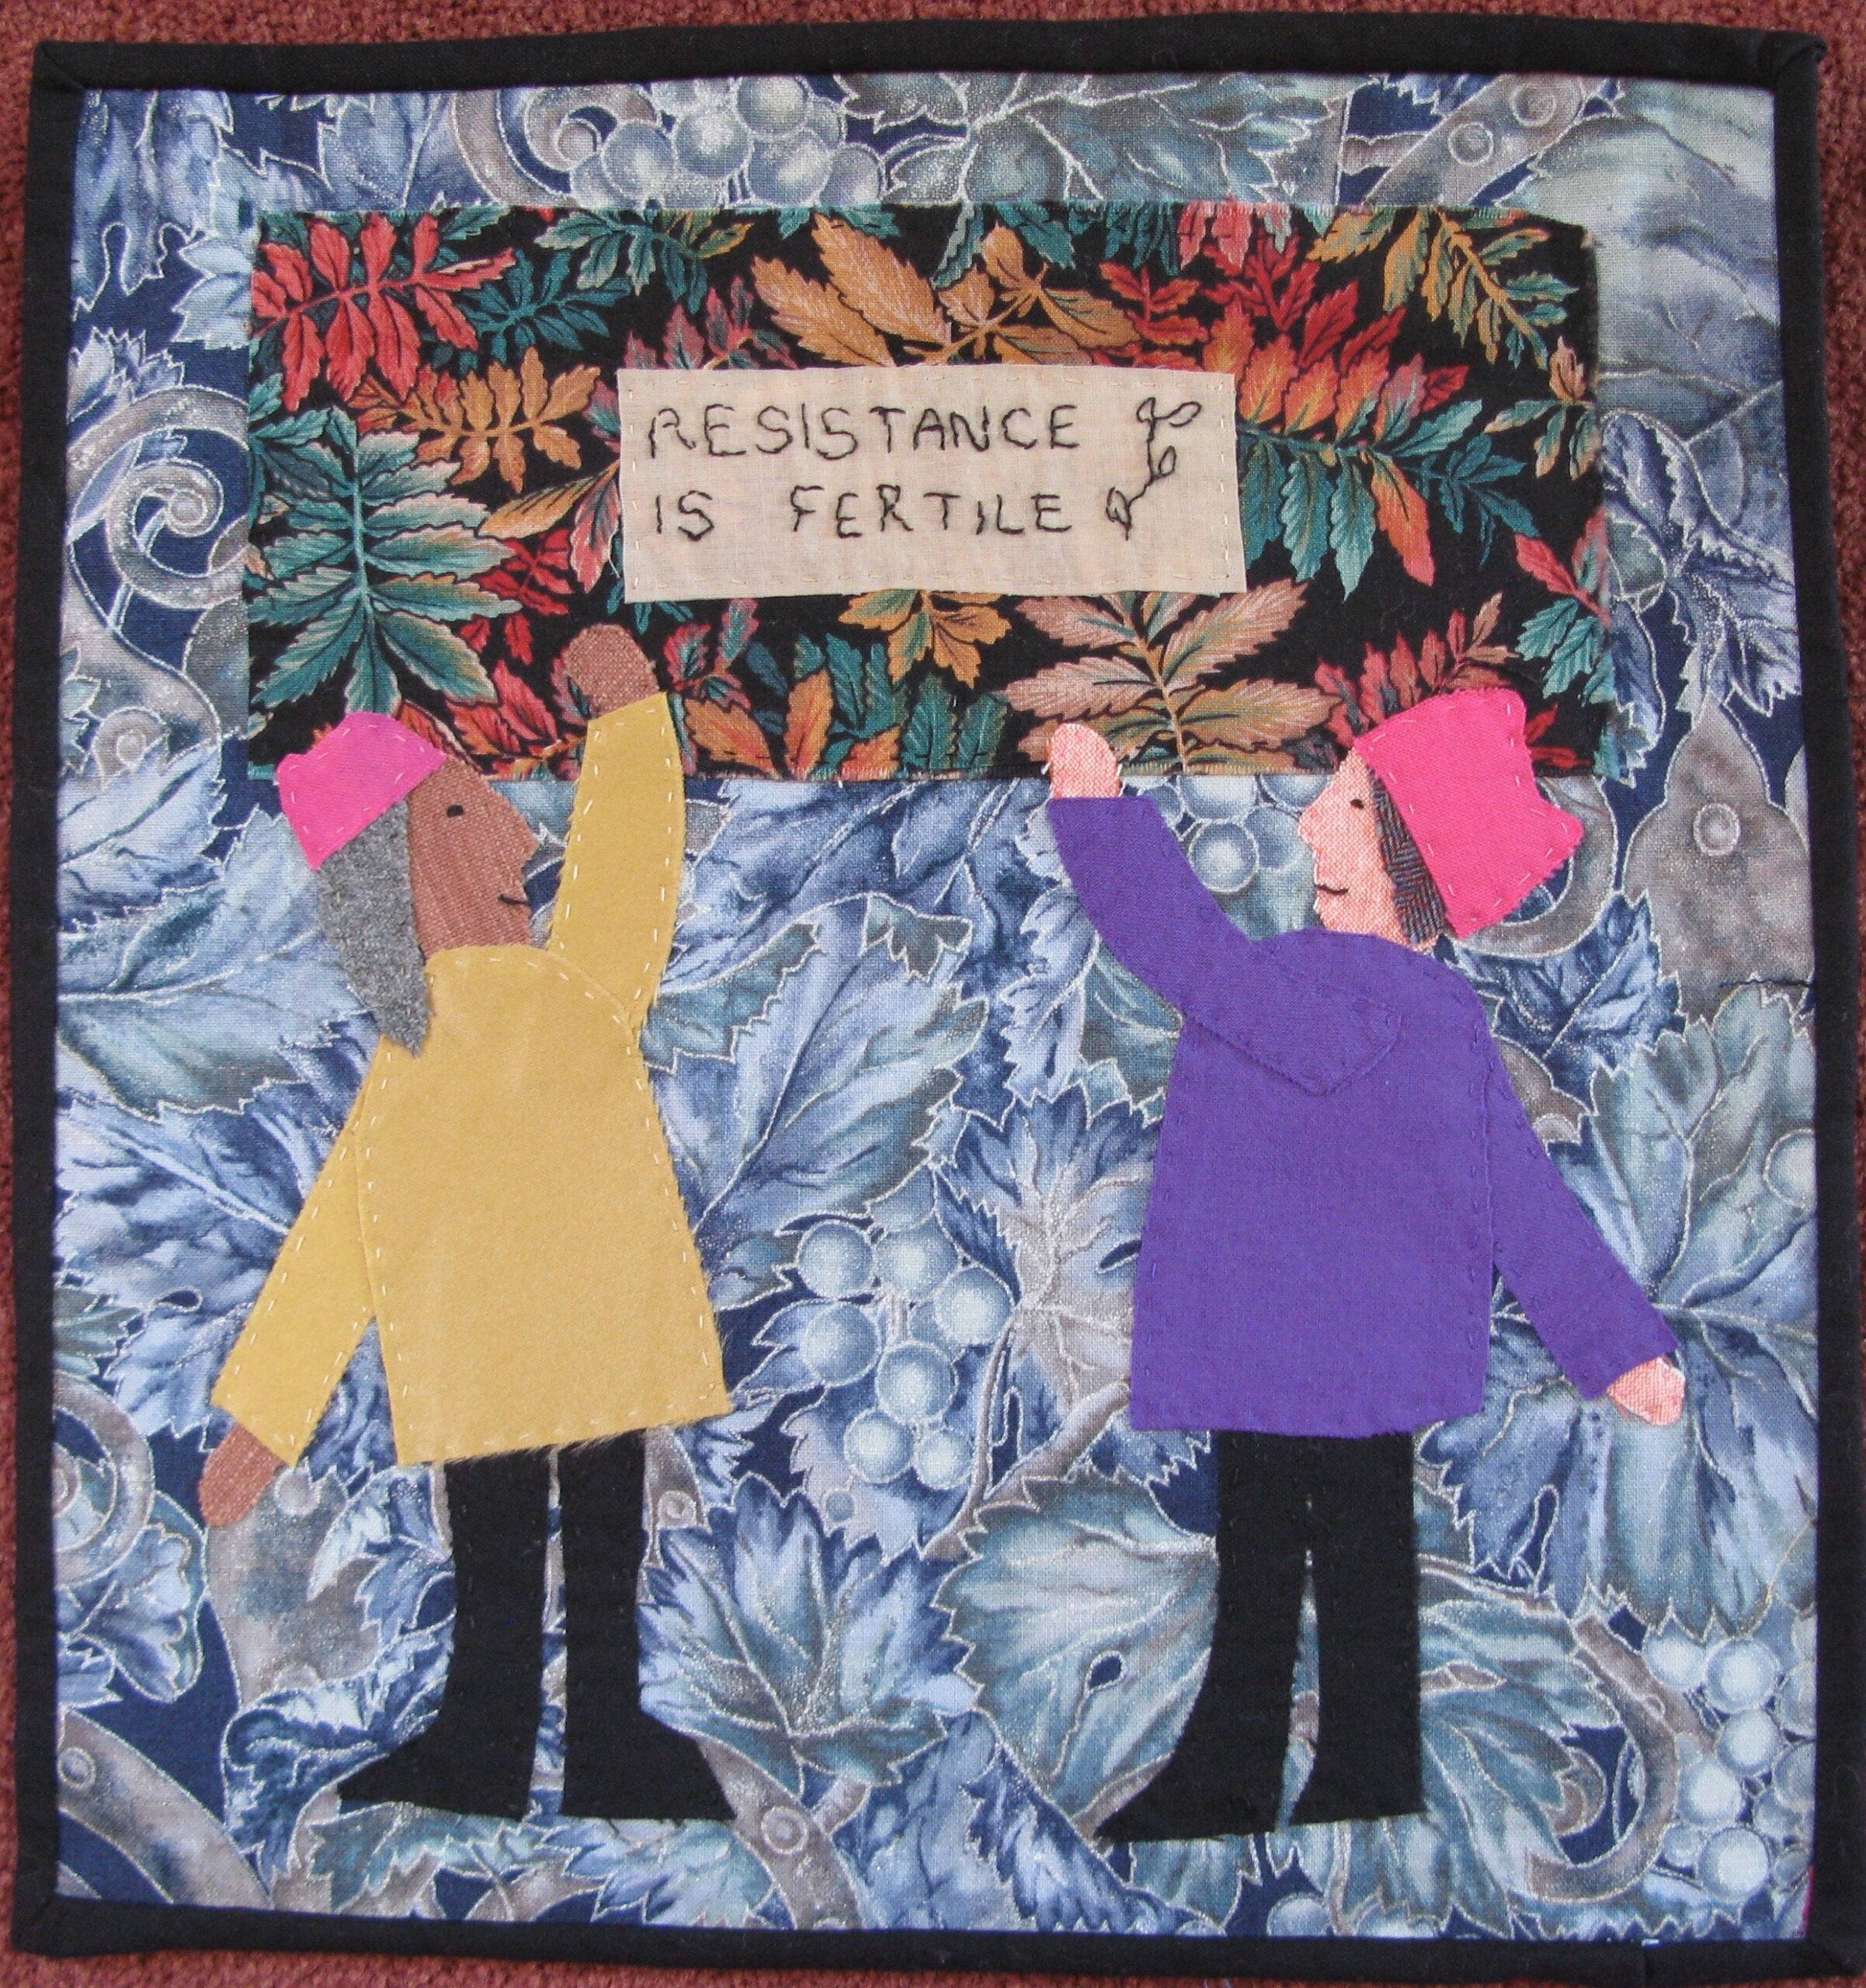 This fabric applique' piece shows to women wearing the symbolic pink hats of the Women's March. They are standing against a background of blue leaves and berries, holding up a banner bordered with more leave in fall colours. The words on the banner read:  Resistance is Fertile.
 